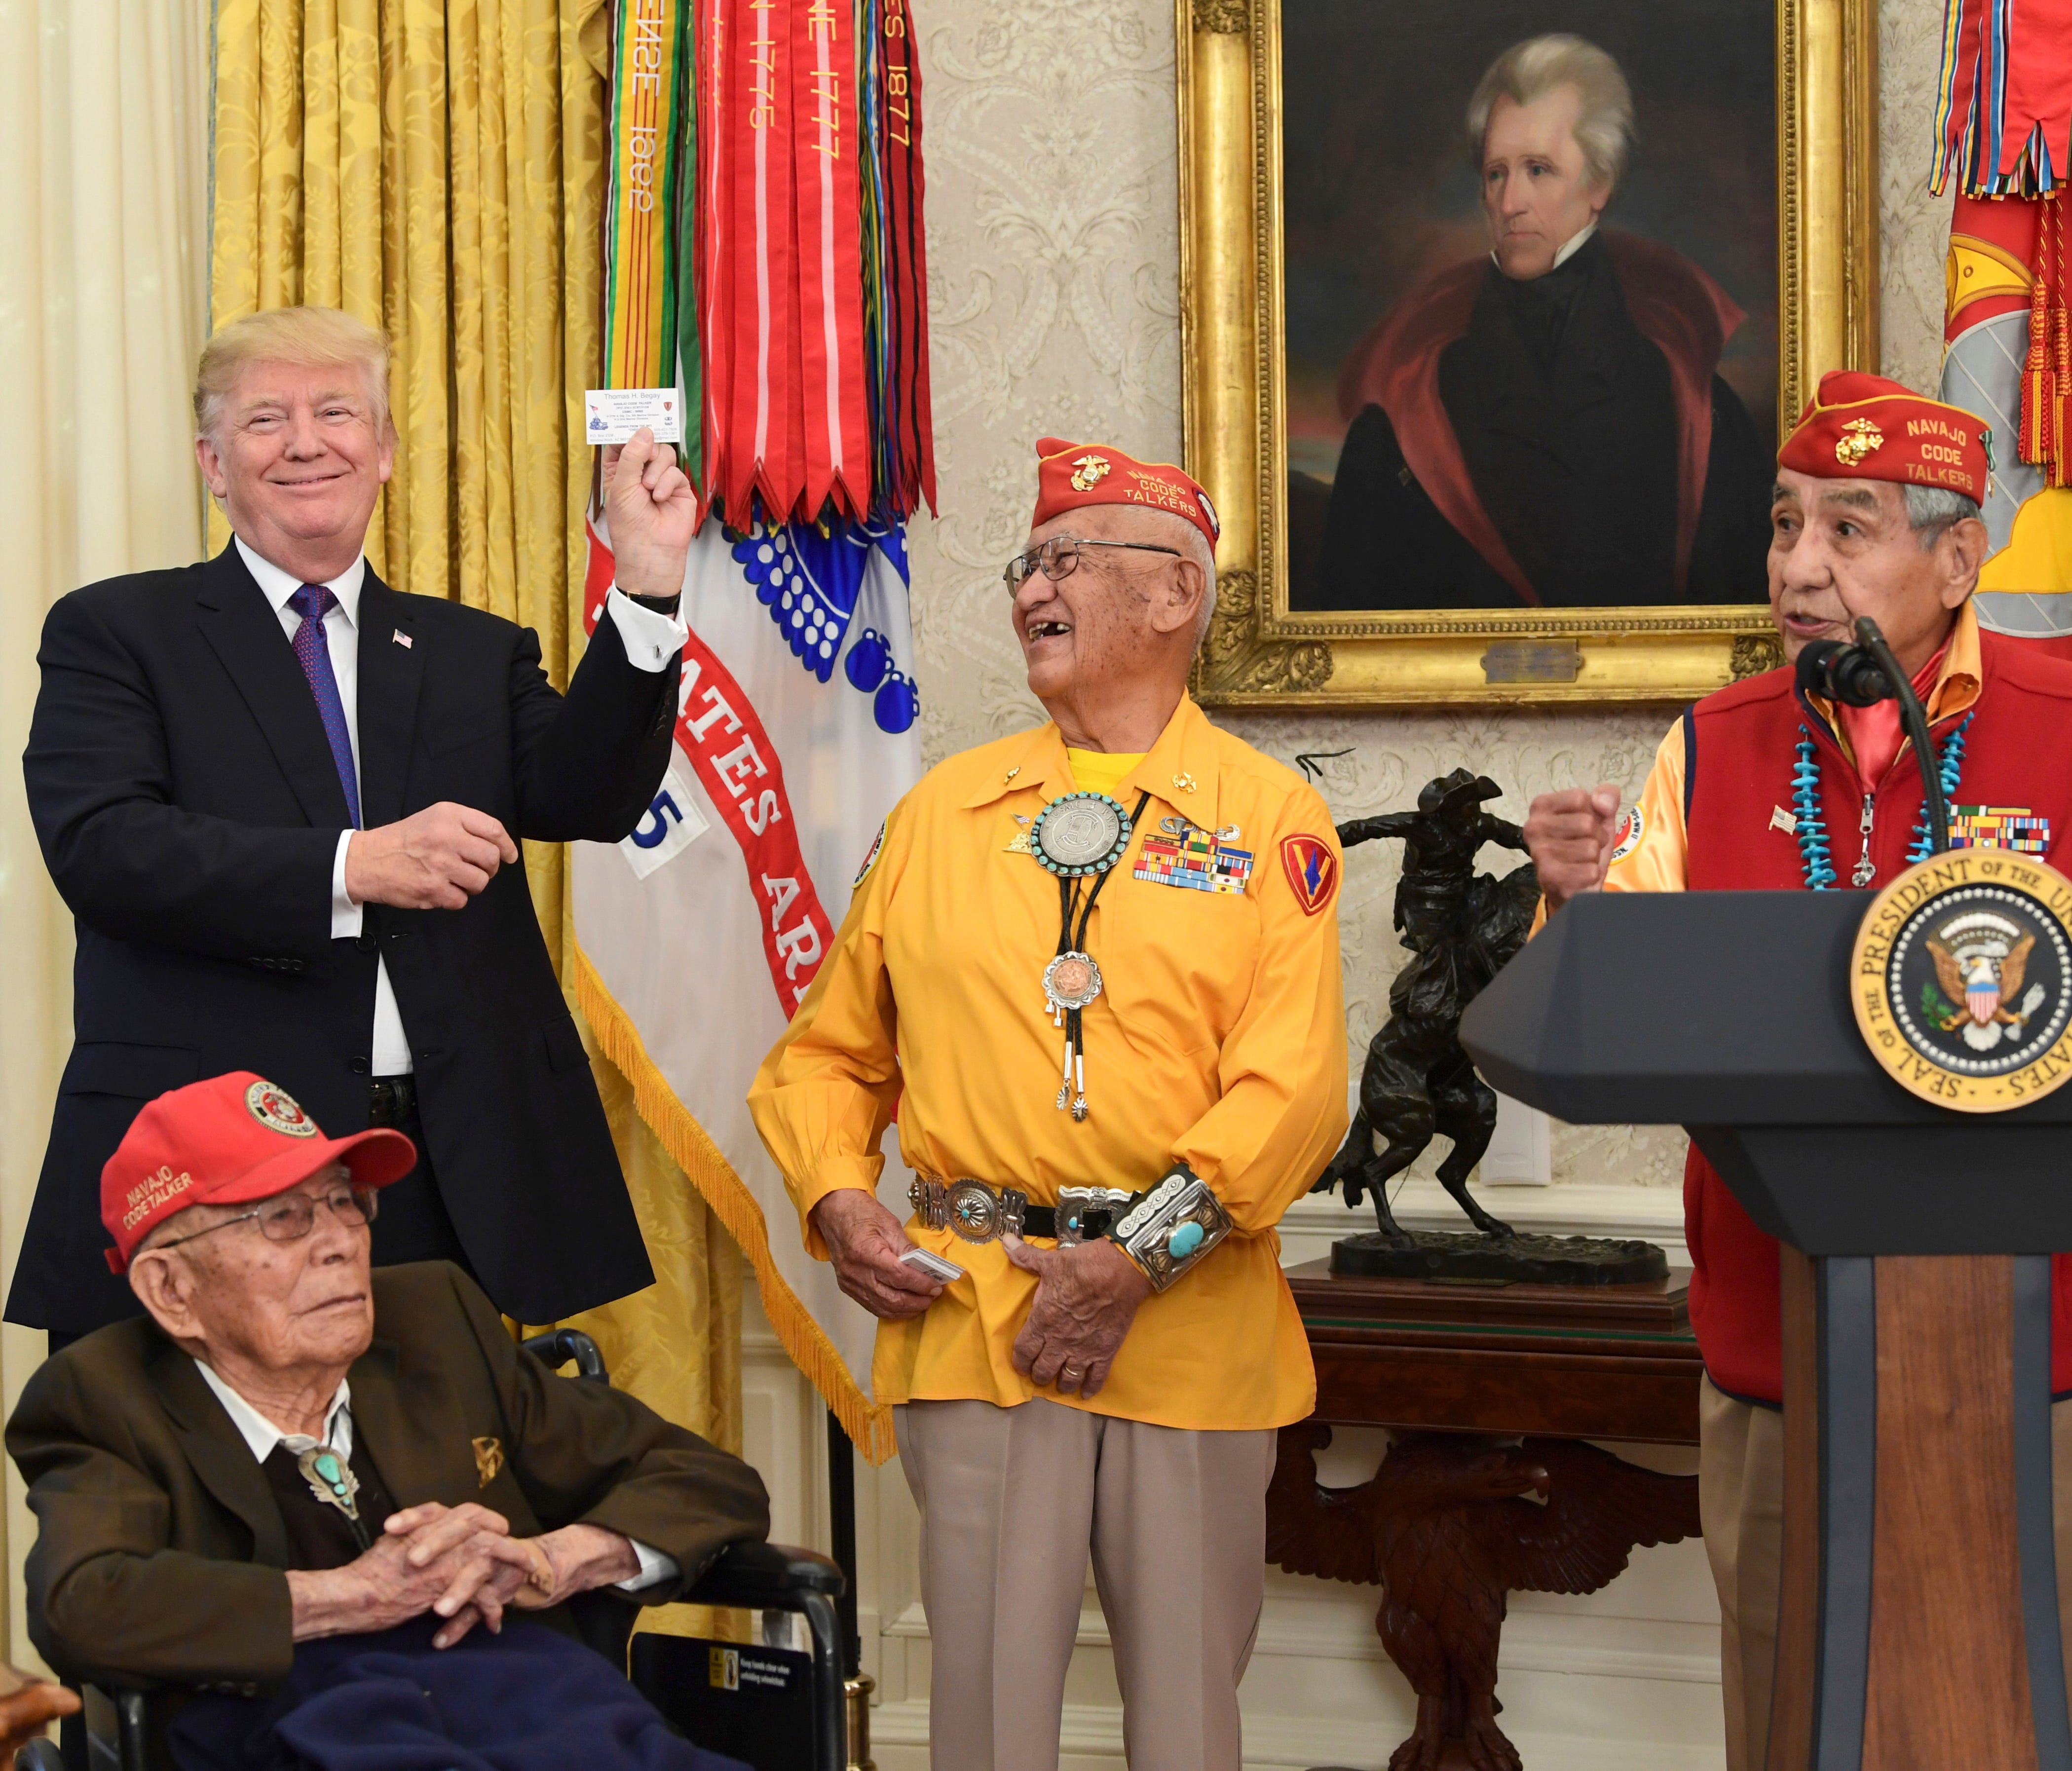 President Donald Trump, standing left, holds up the card of Navajo Code Talker Thomas Begay, center, during their meeting in the Oval Office of the White House in Washington, Monday, Nov. 27, 2017.